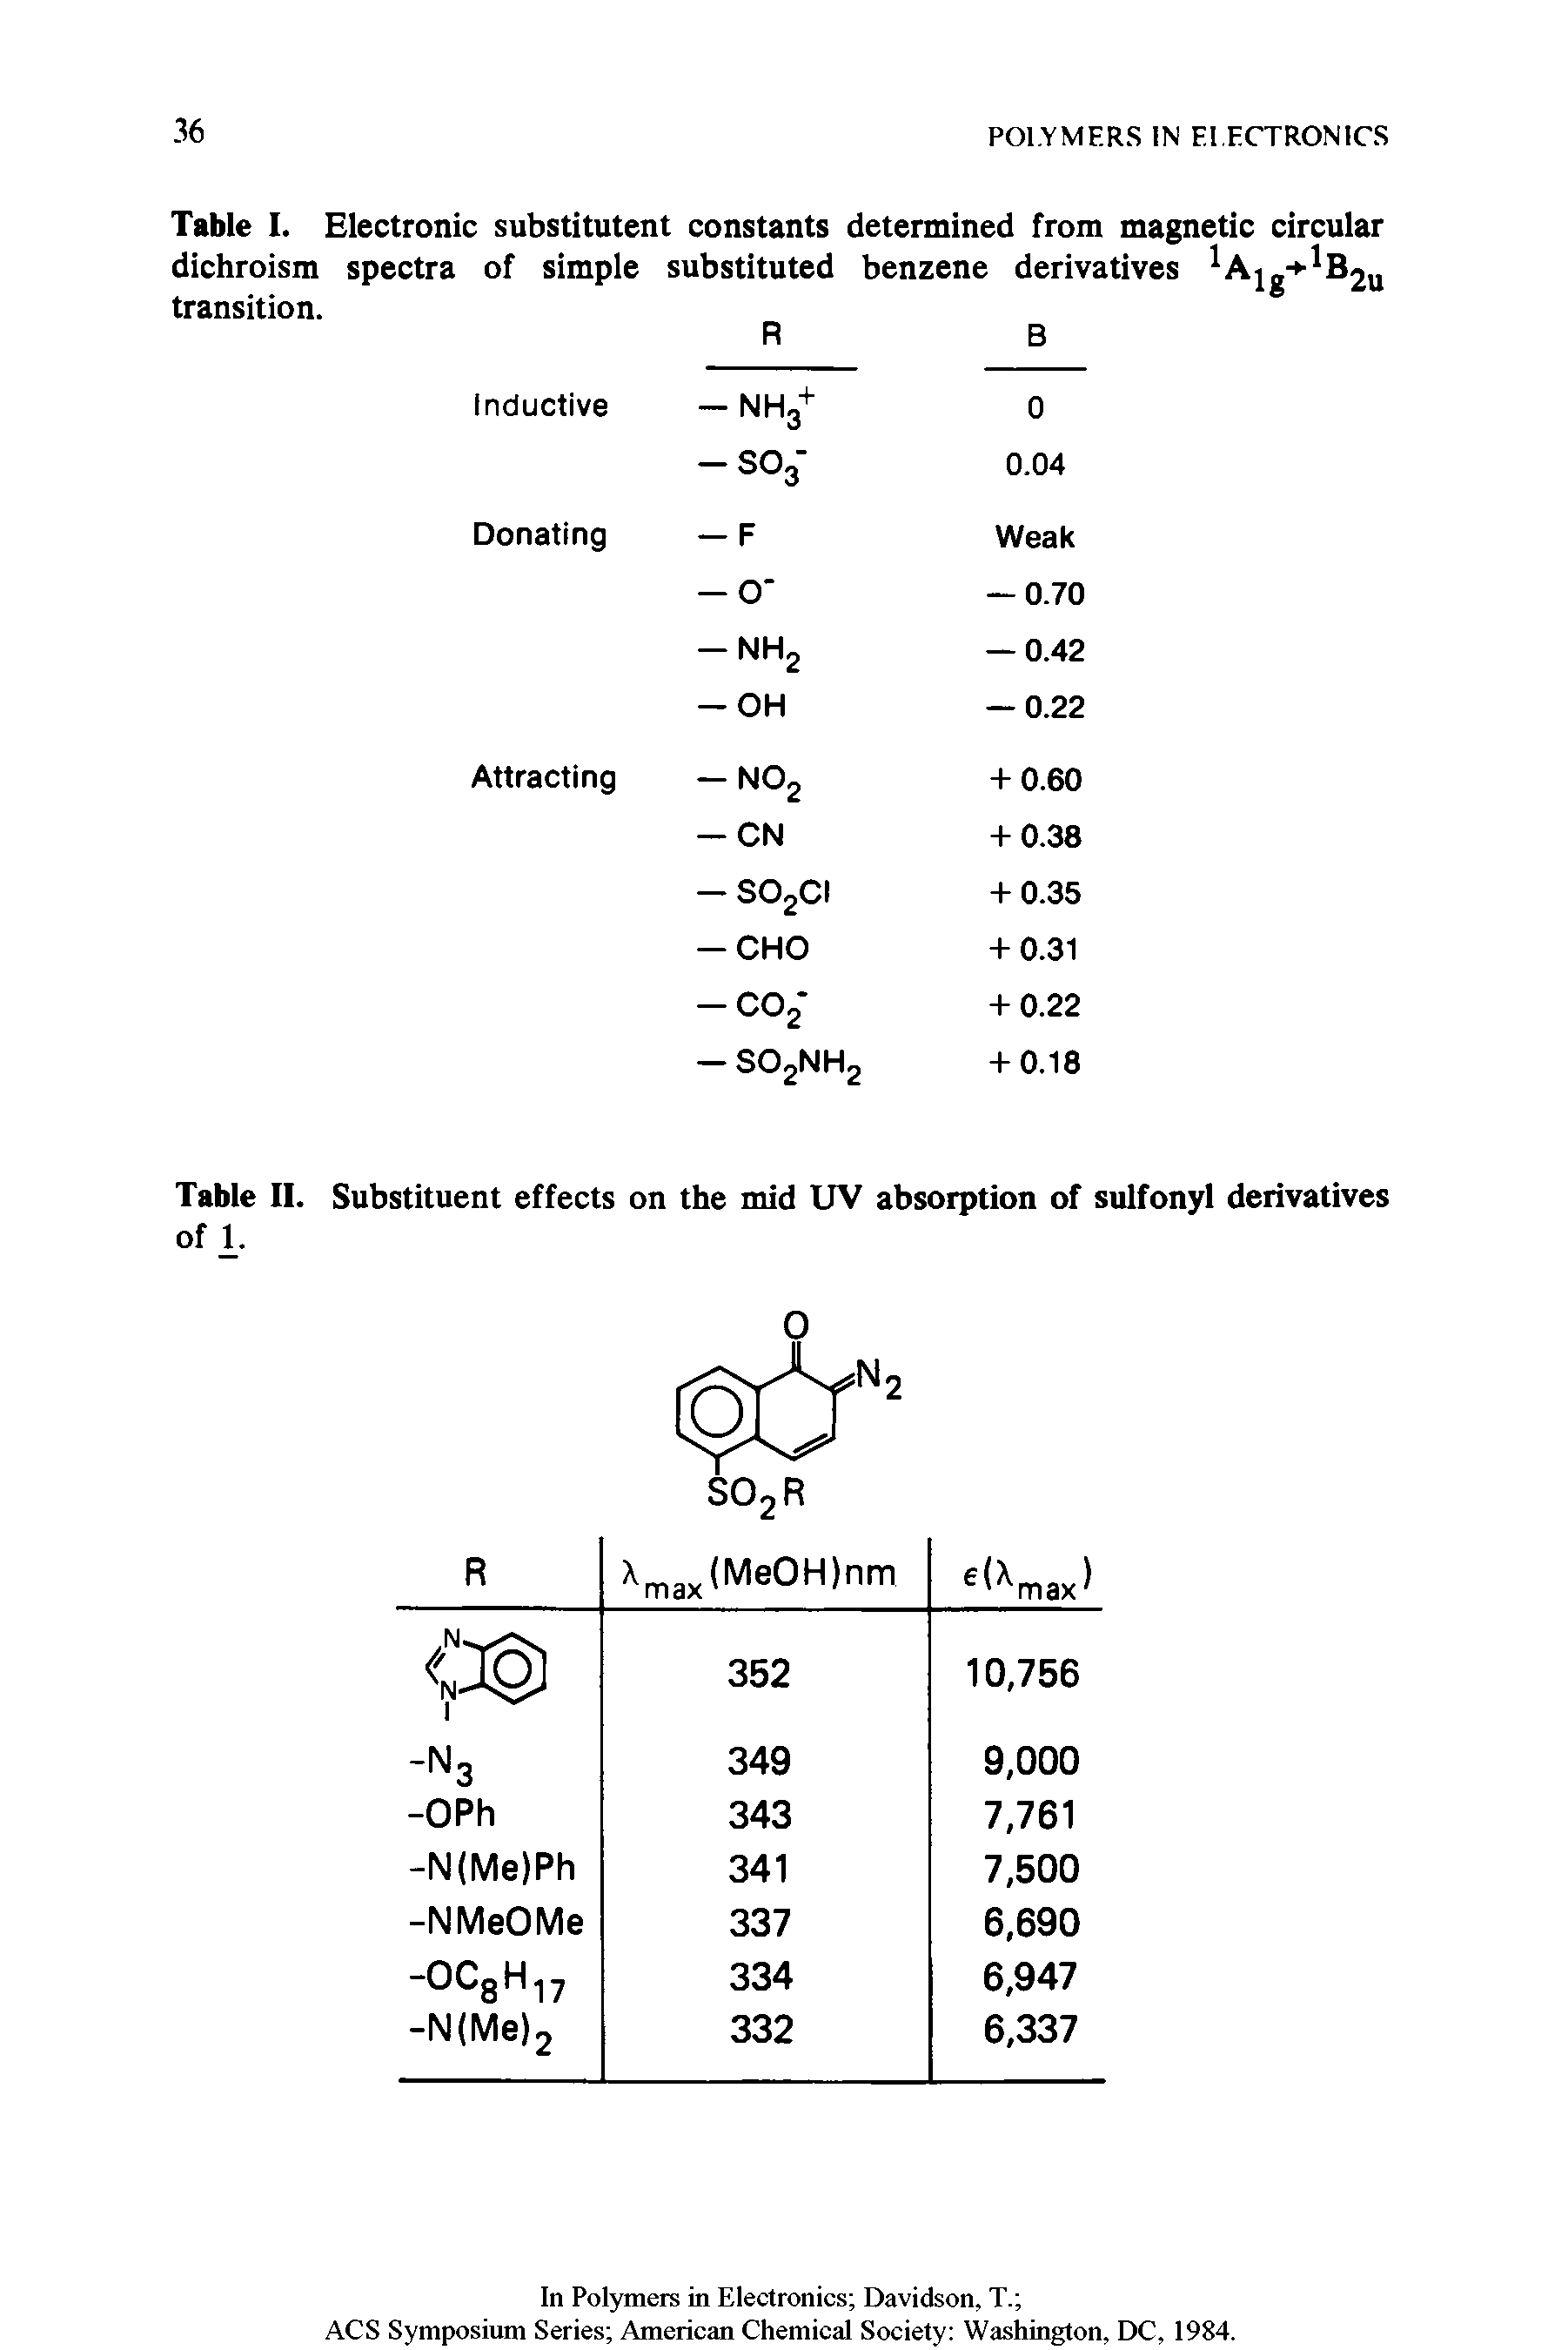 Table I. Electronic substituted constants determined from magnetic circular dichroism spectra of simple substituted benzene derivatives 1A1g+1B2u transition.